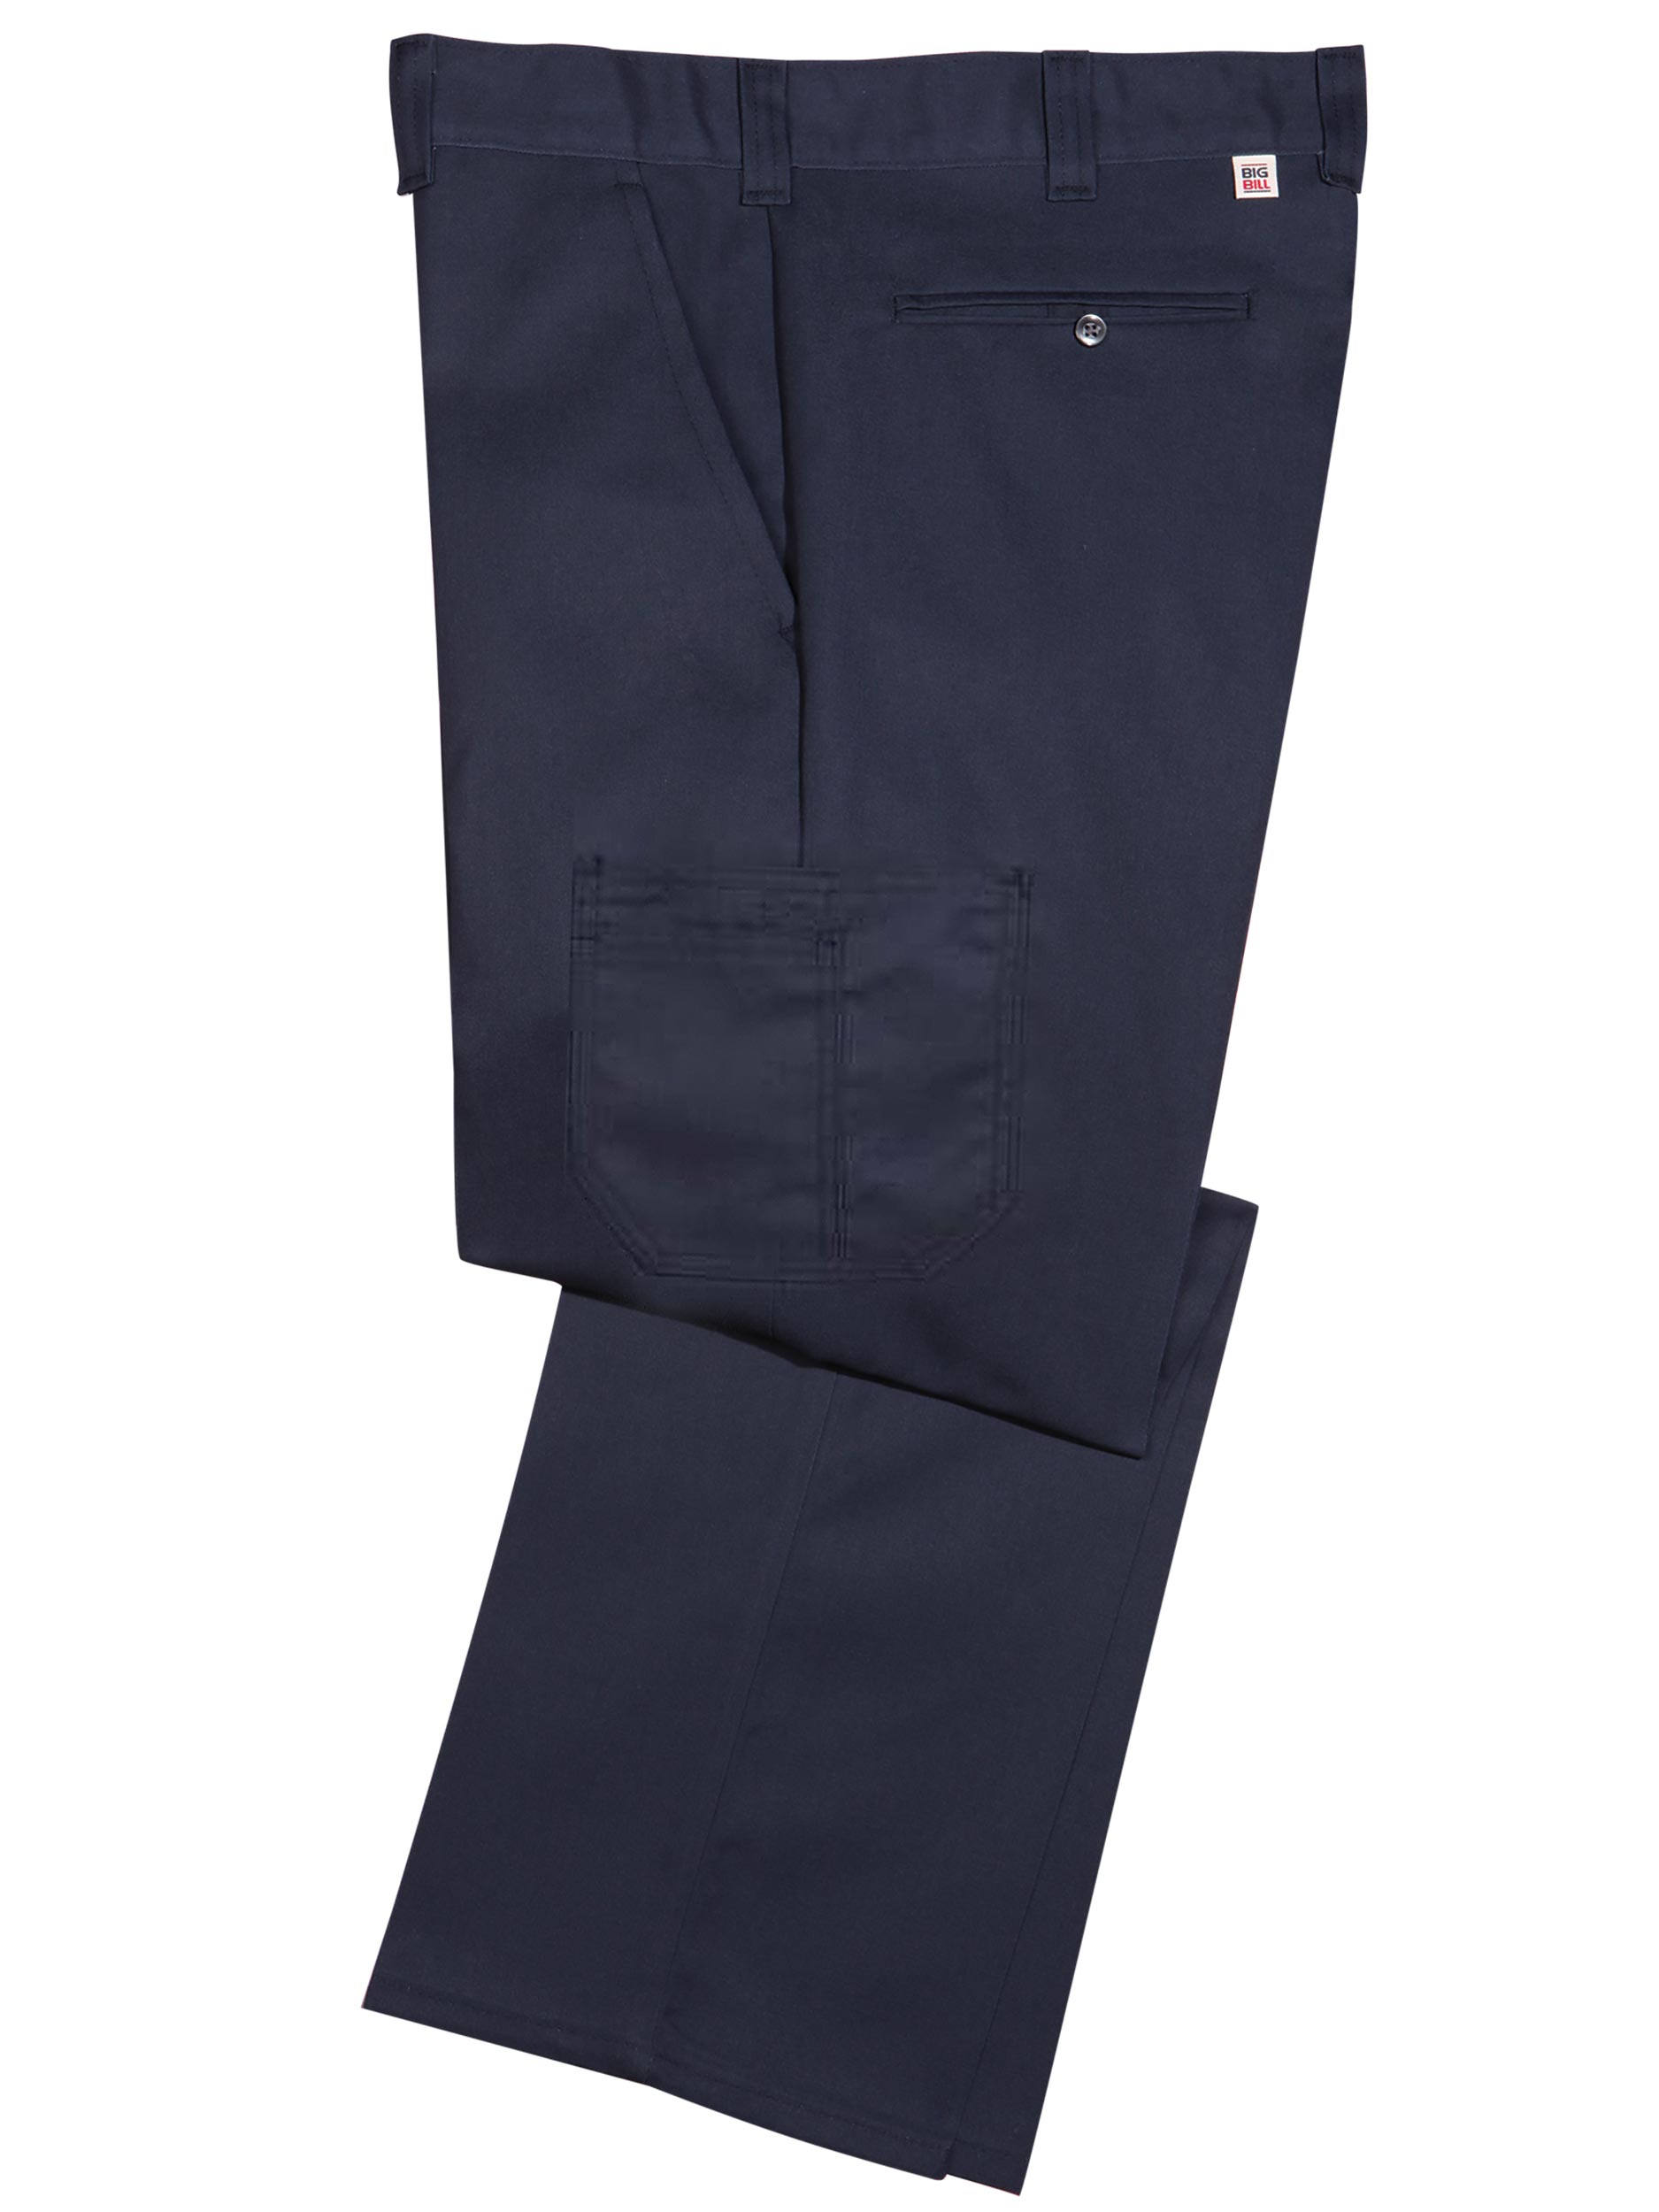 Big Bill Low Rise Fit Cargo Work Pant - 3947